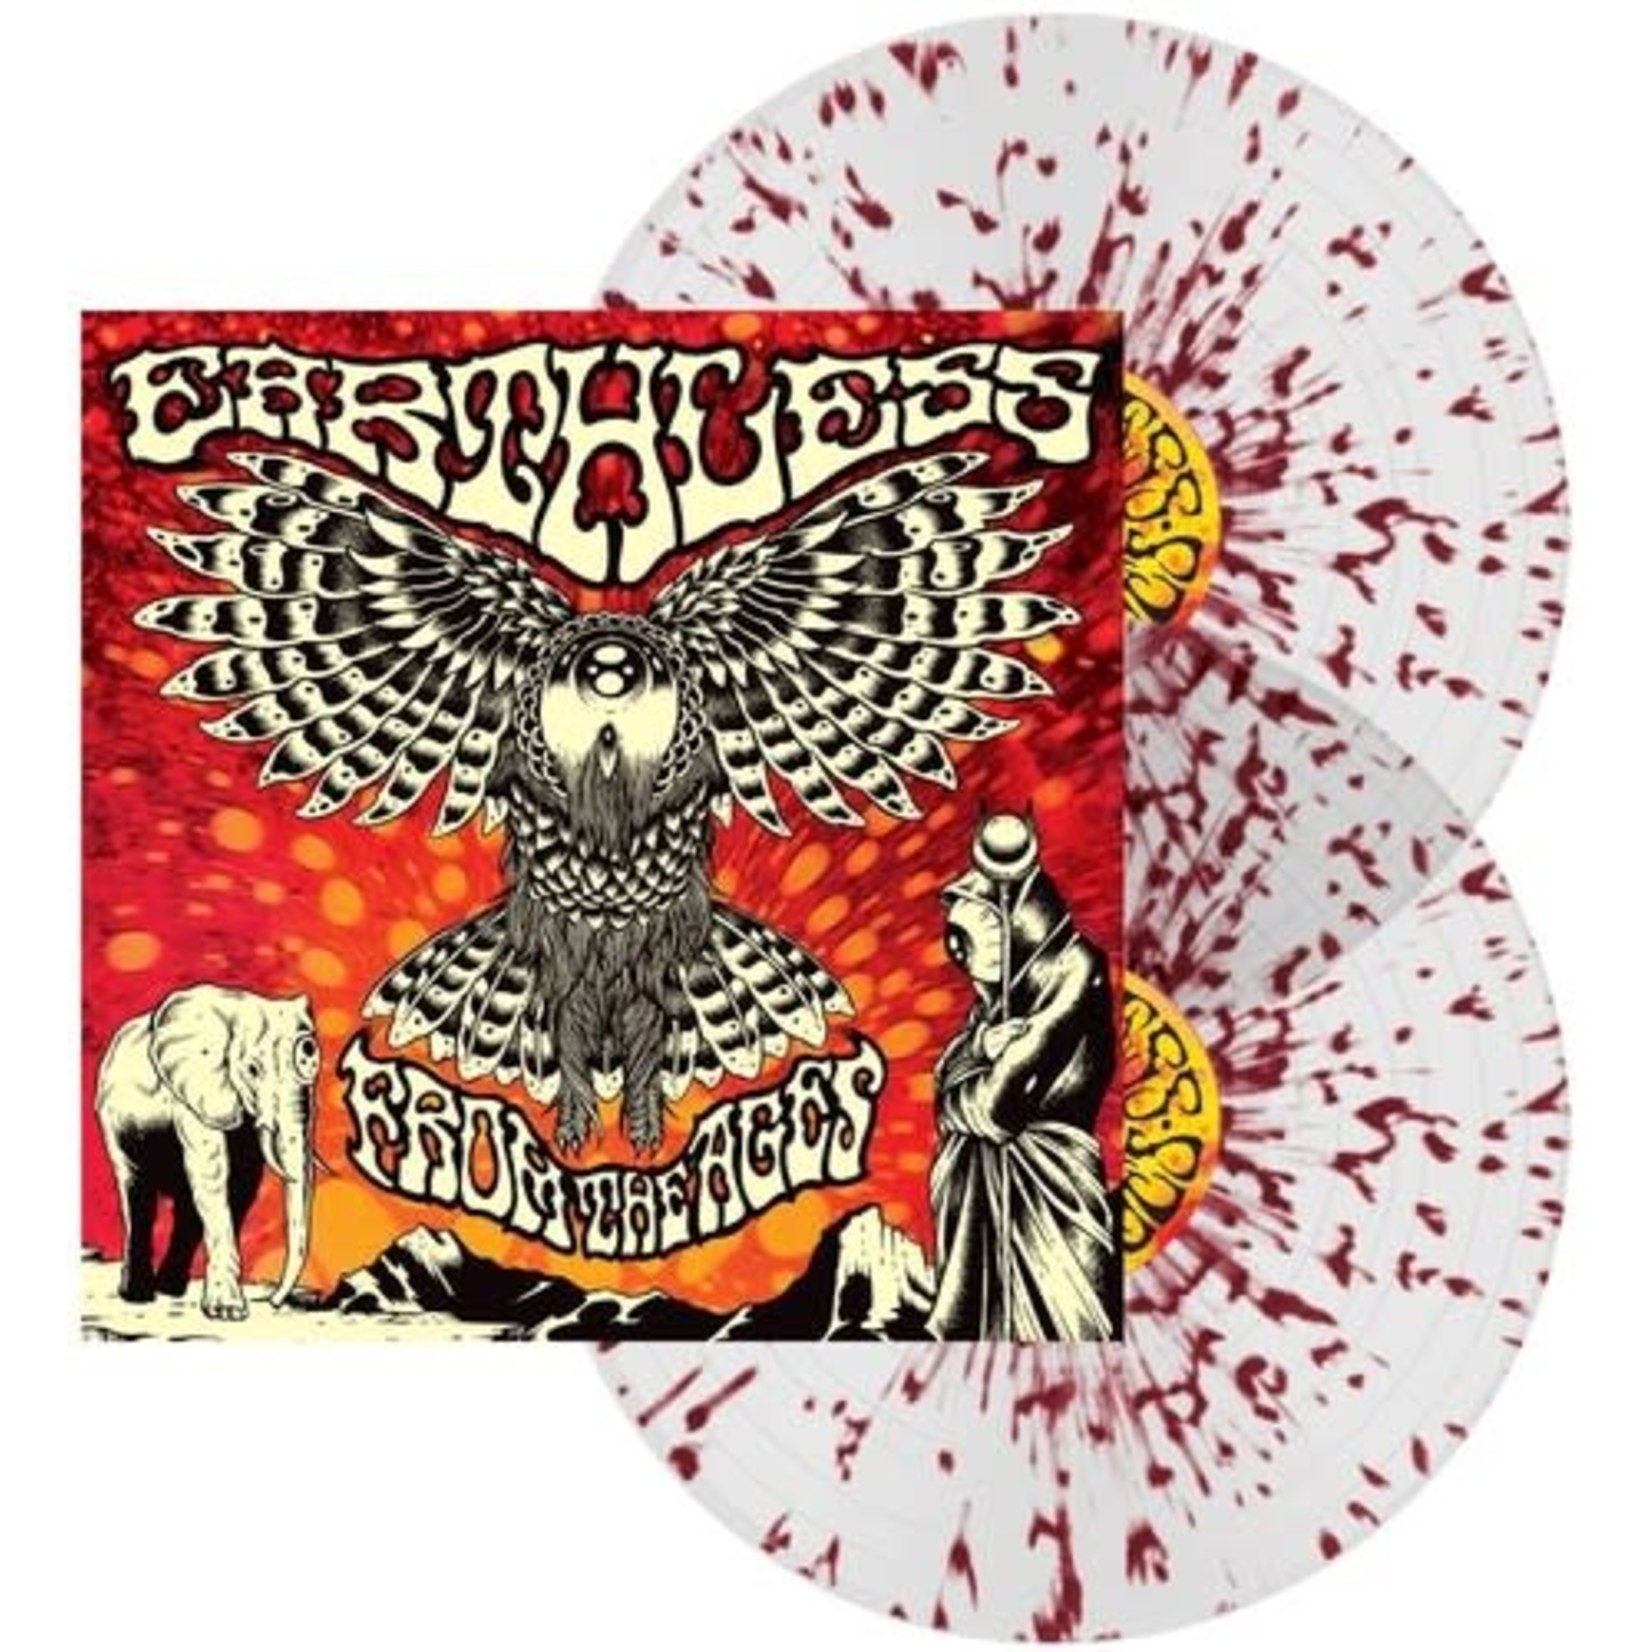 Nuclear Blast Earthless - From The Ages (LP) [Clear/Red Splatter]